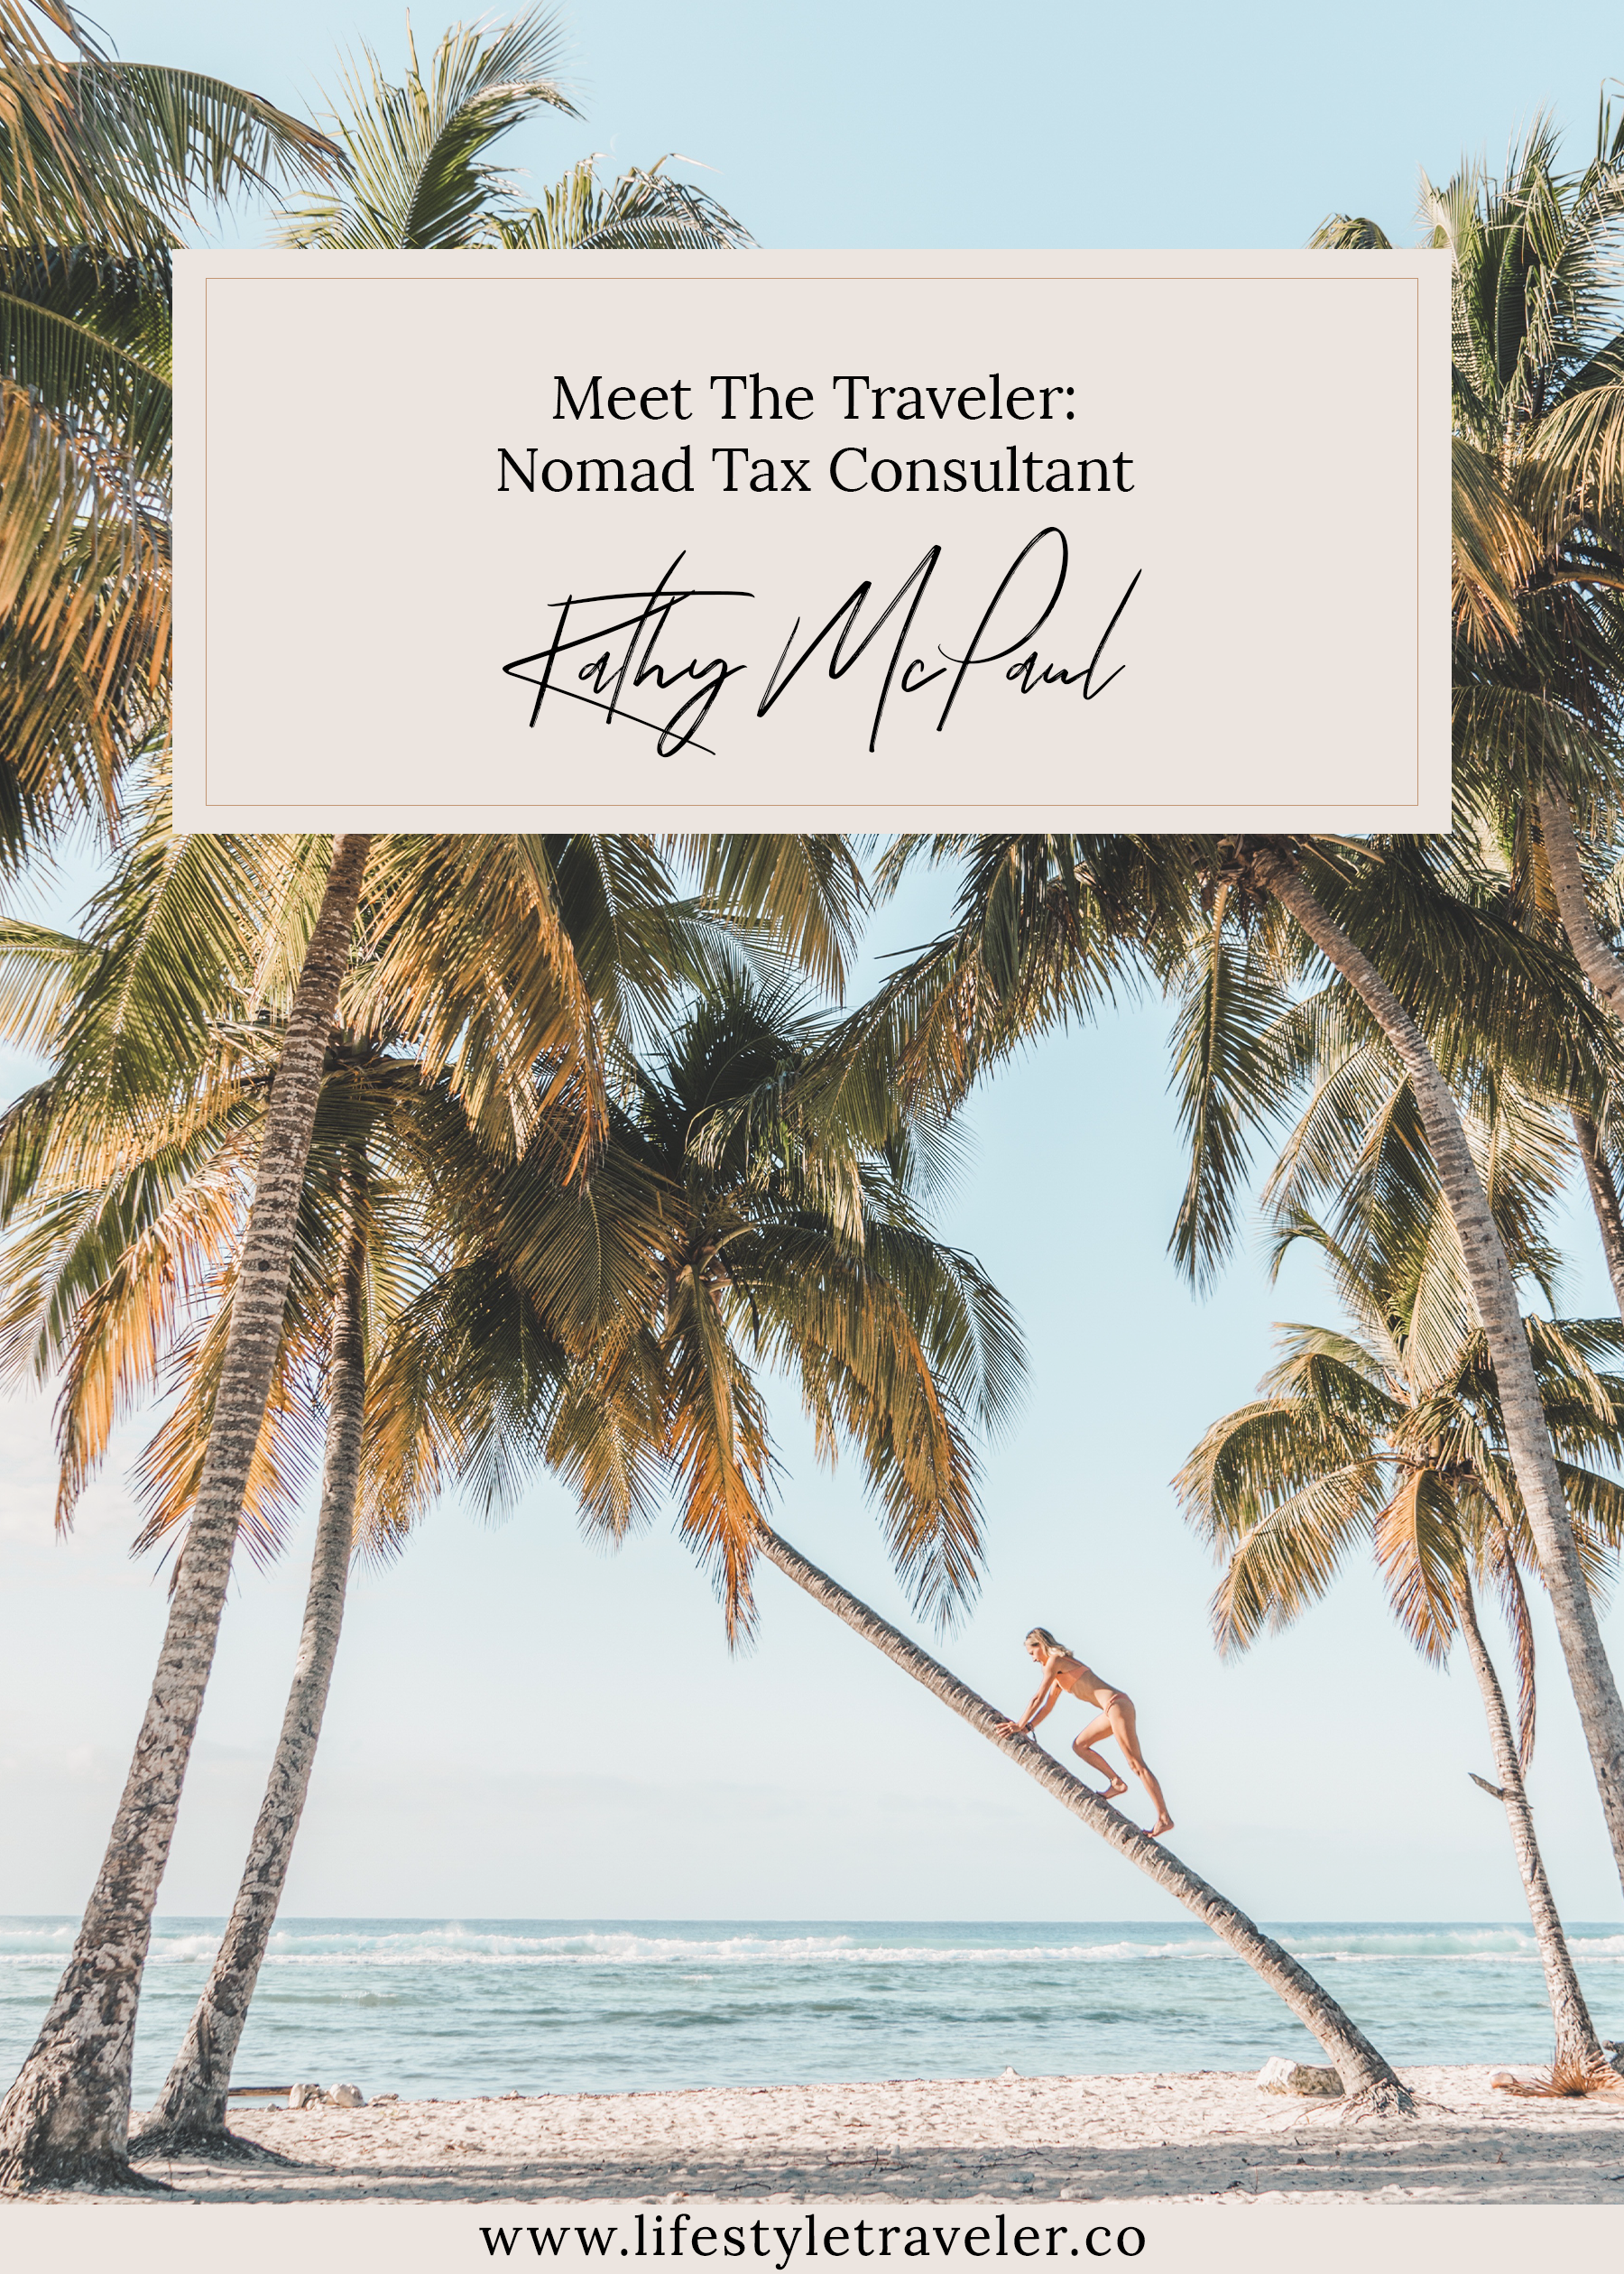 Meet The Traveler: Nomad Tax Consultant Kathleen | lifestyletraveler.co | IG: @lifestyletraveler.co | Photo by: Kathleen Di Paolo